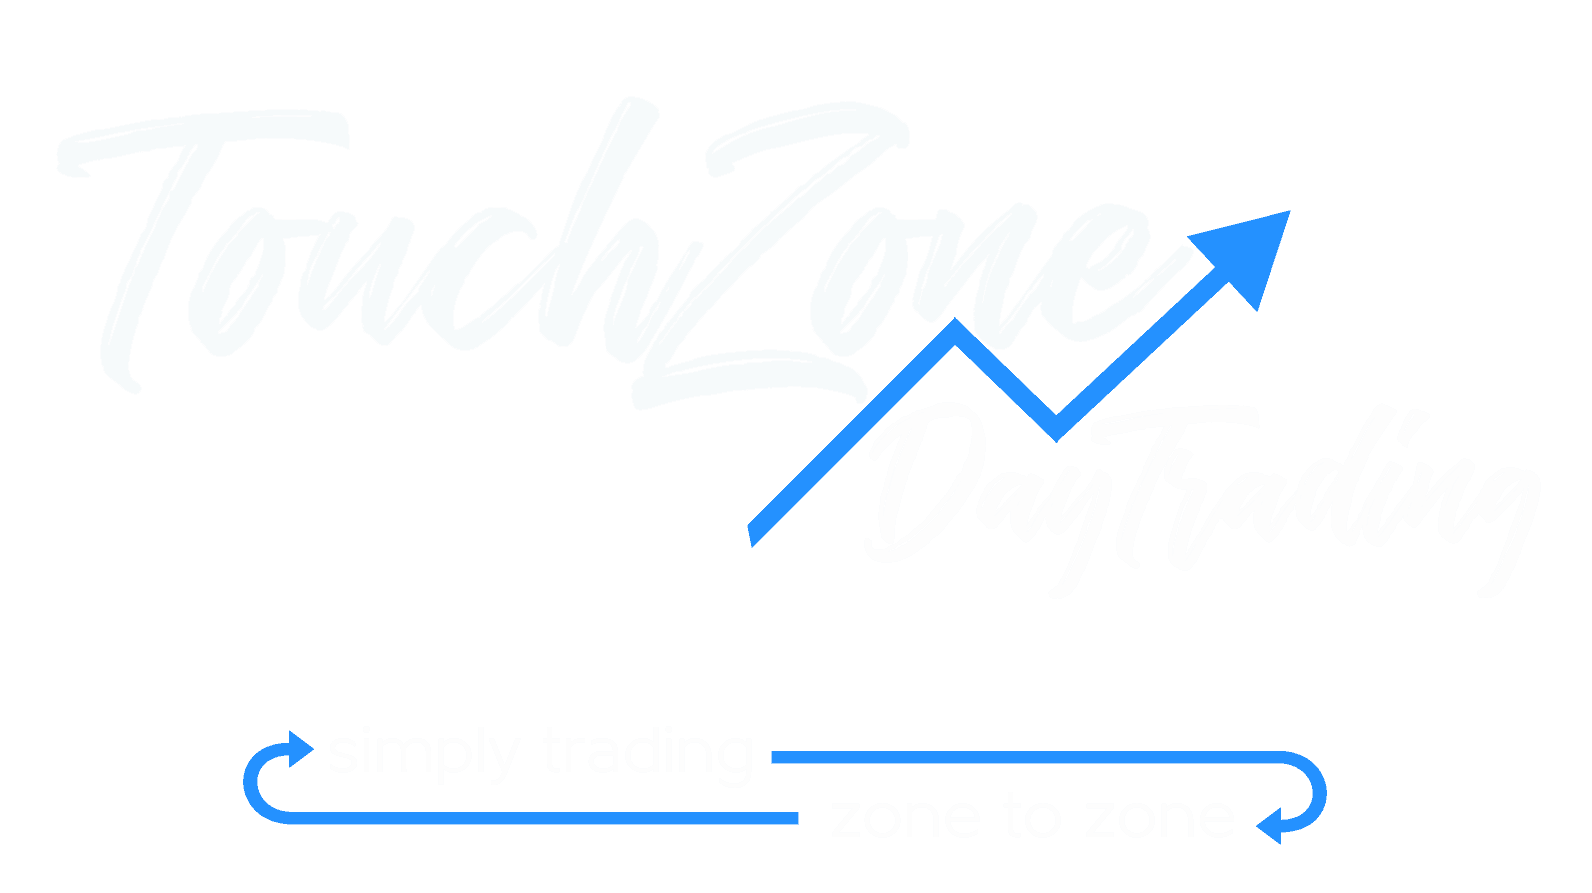 TouchZone DayTrading Trade Room Open Limited Seats